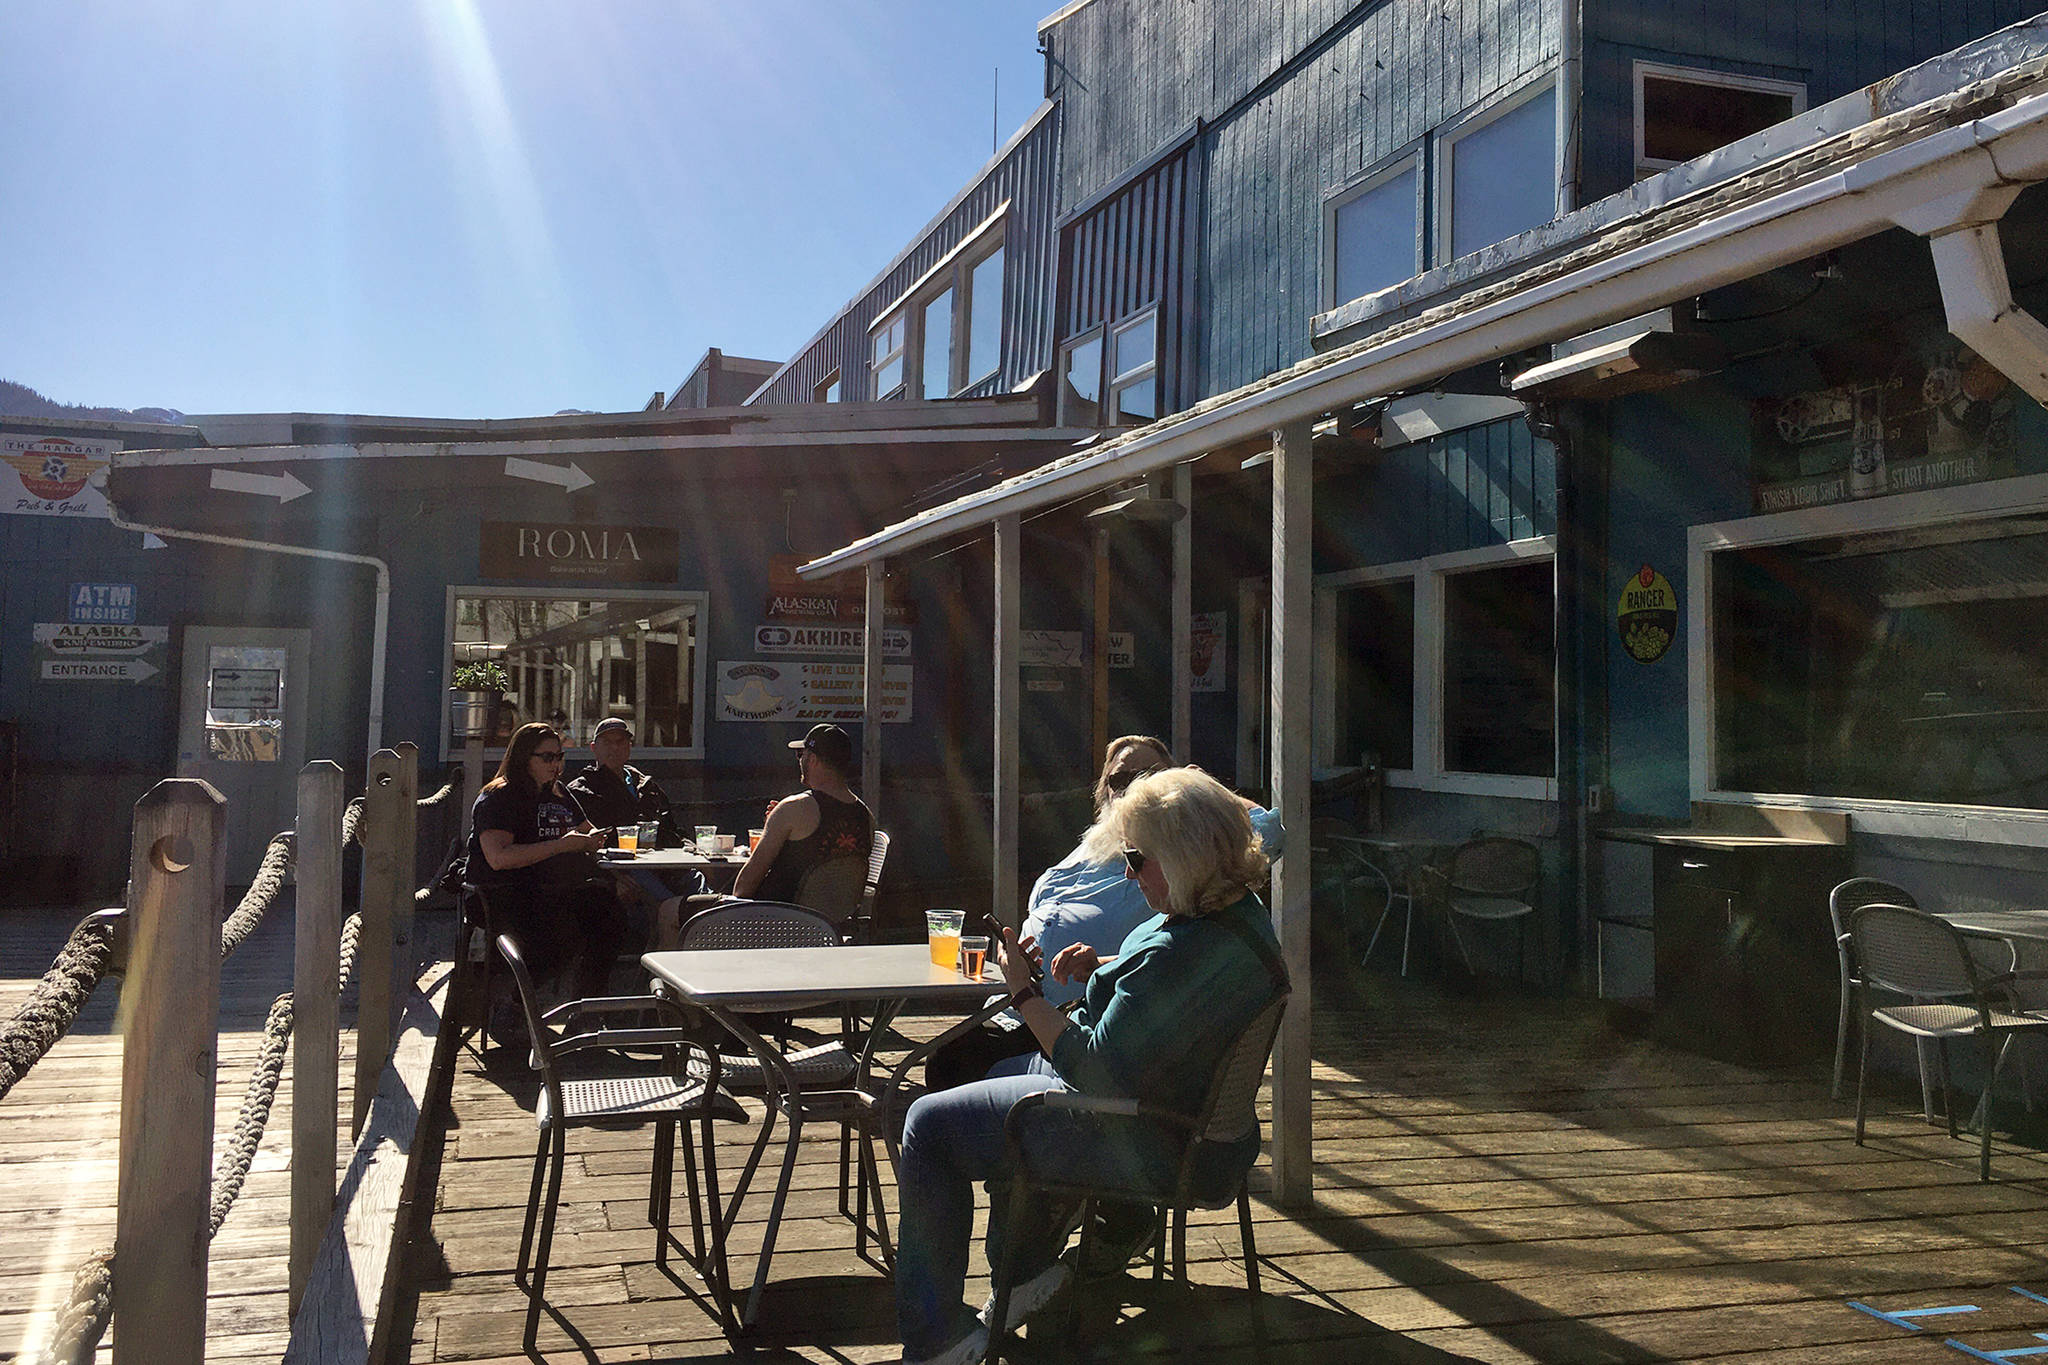 People get drinks and sun at the Flight Deck, Thursday, May 21. Restaurants are among the businesses able to open to 100% capacity as of Friday, May 22, although many business owners and managers said they intend to proceed slowly. (Michael S. Lockett | Juneau Empire)